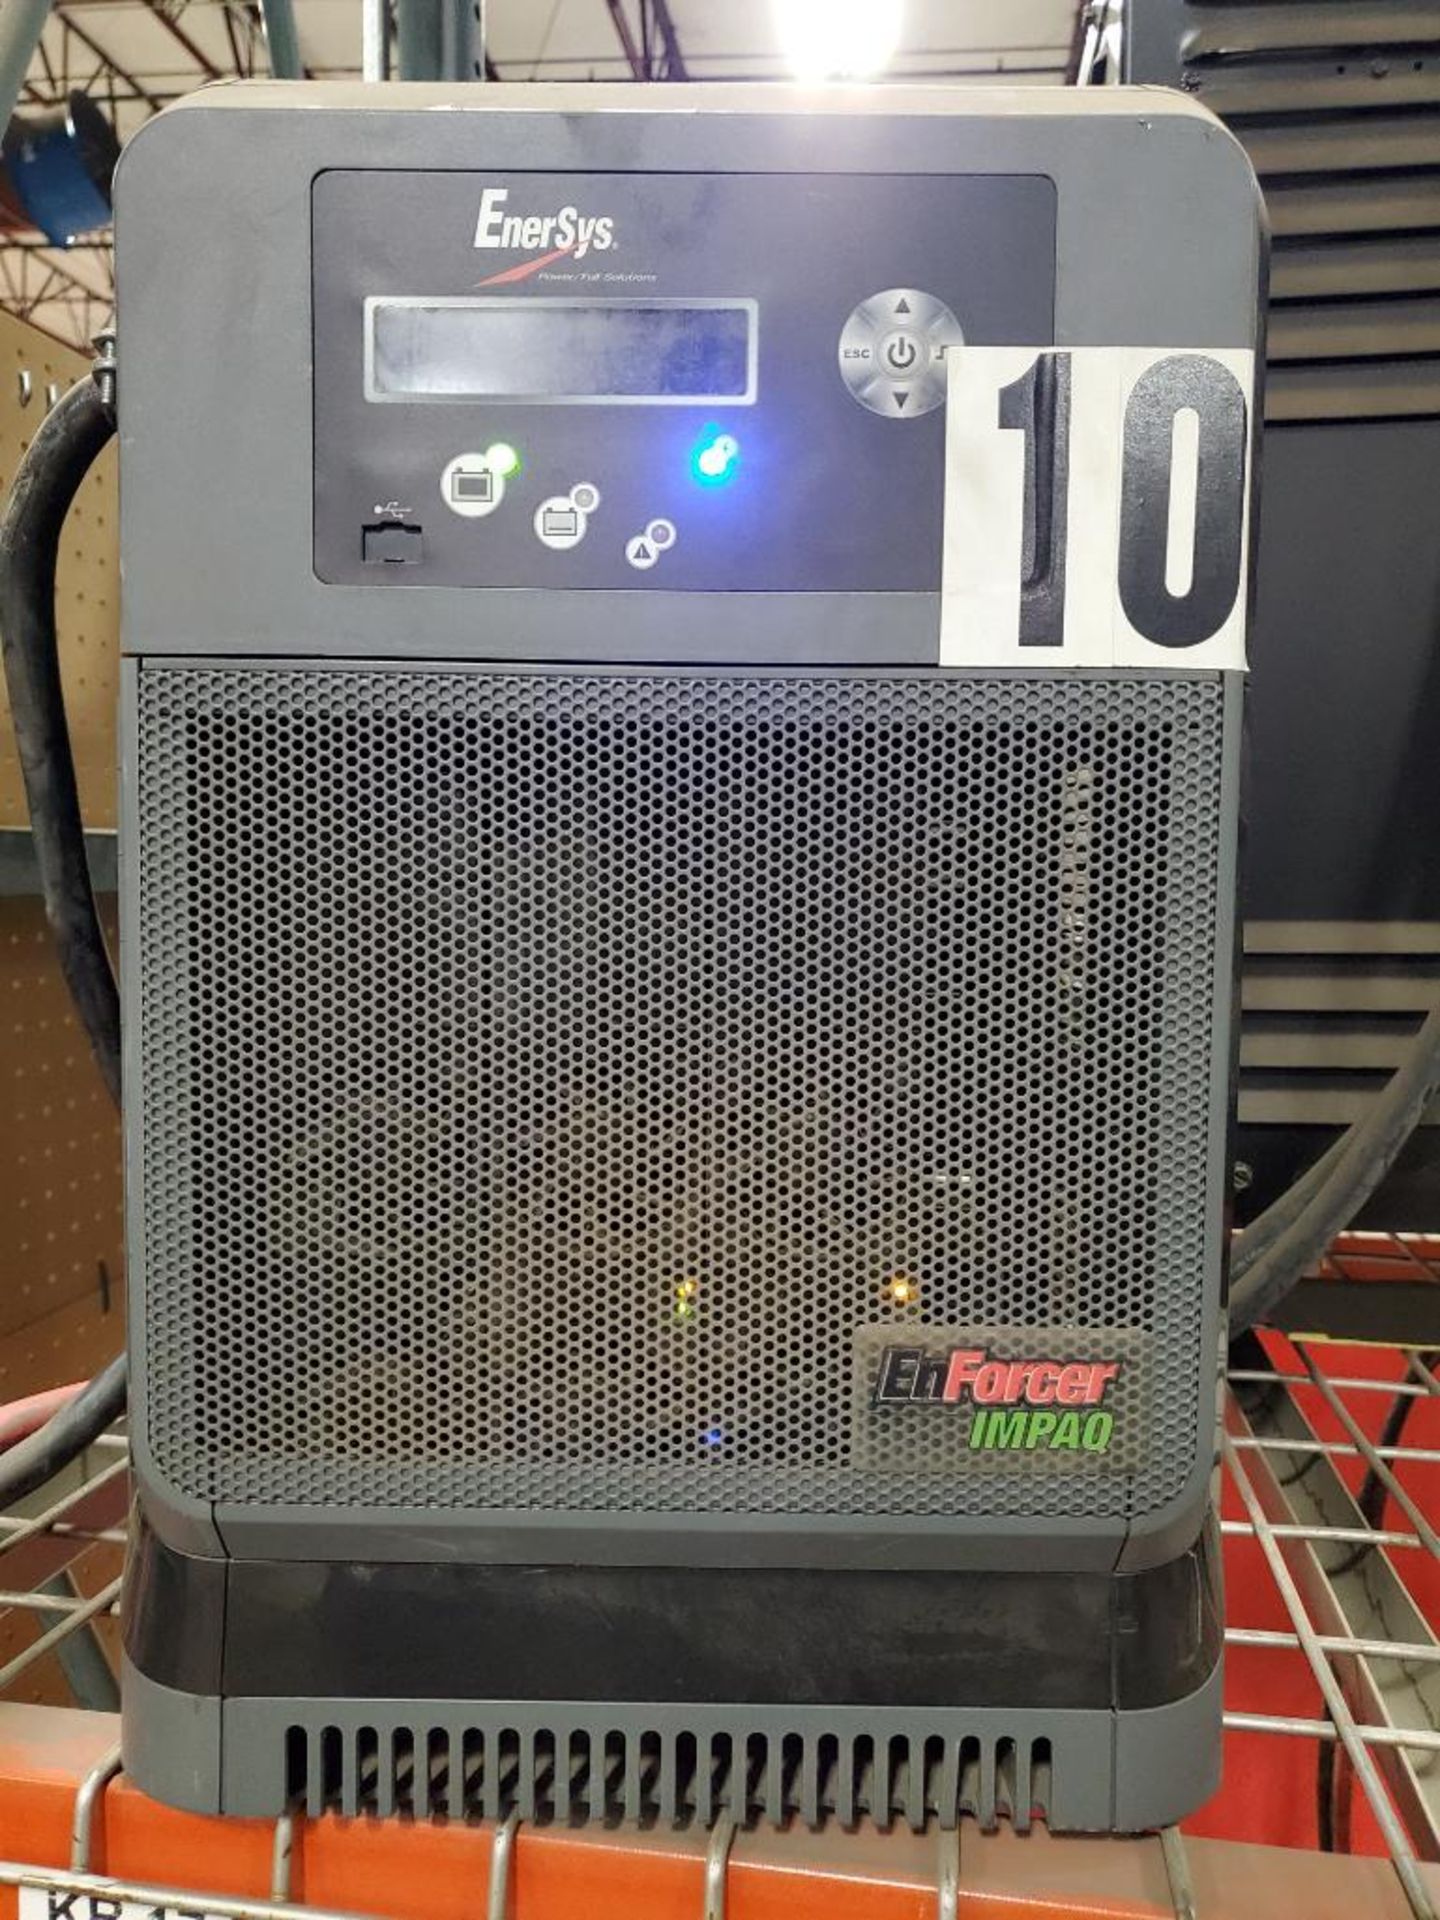 Enersys Enforcer Impaq 24/36/48V Battery Charger, Model EI3-IN-4Y, Battery Type L-A, 480V, 3 PH, 50/ - Image 2 of 5